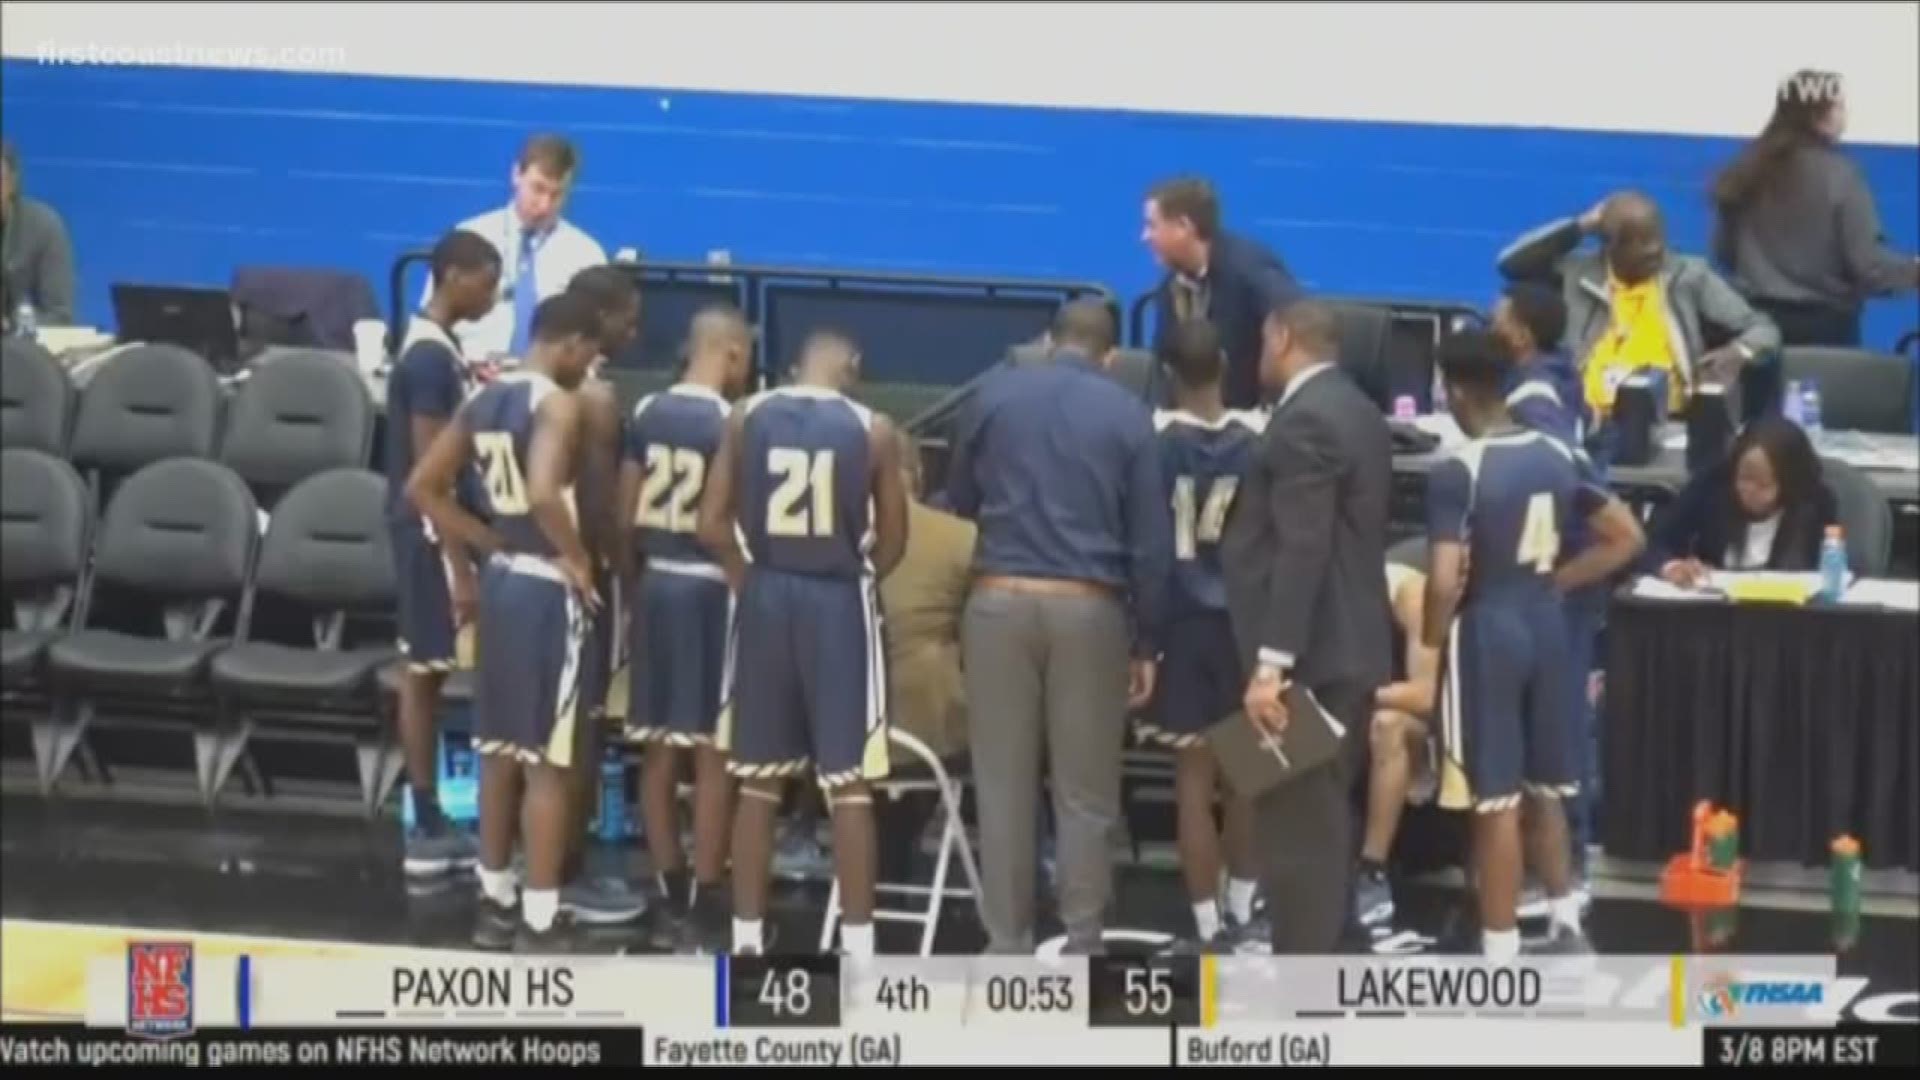 Fresh off their first Final Four appearance since 1965, Paxon has their entire line-up back and is ready for more in 2019-2020.